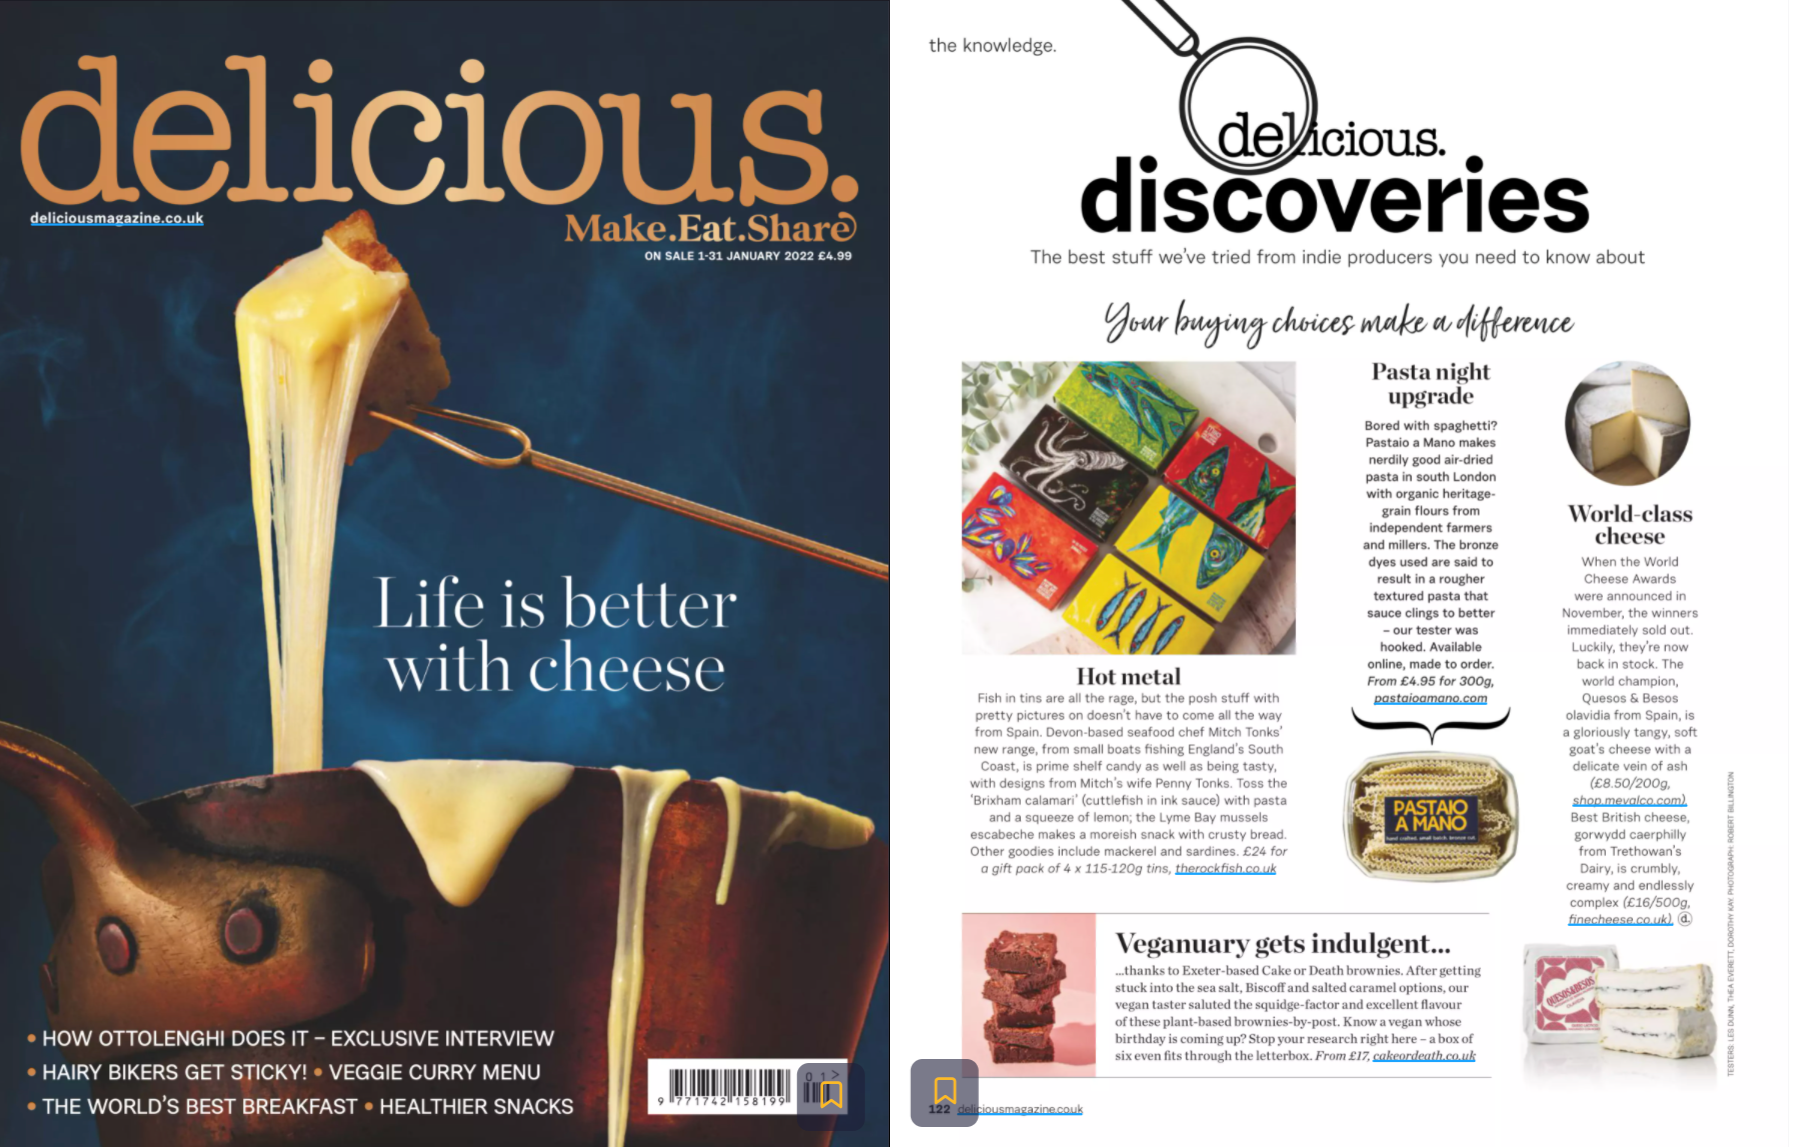 Delicious Magazine, 1-31, January 2022 page 122 "The Knowledge" Delicious Discoveries. The Trethowan Brothers.